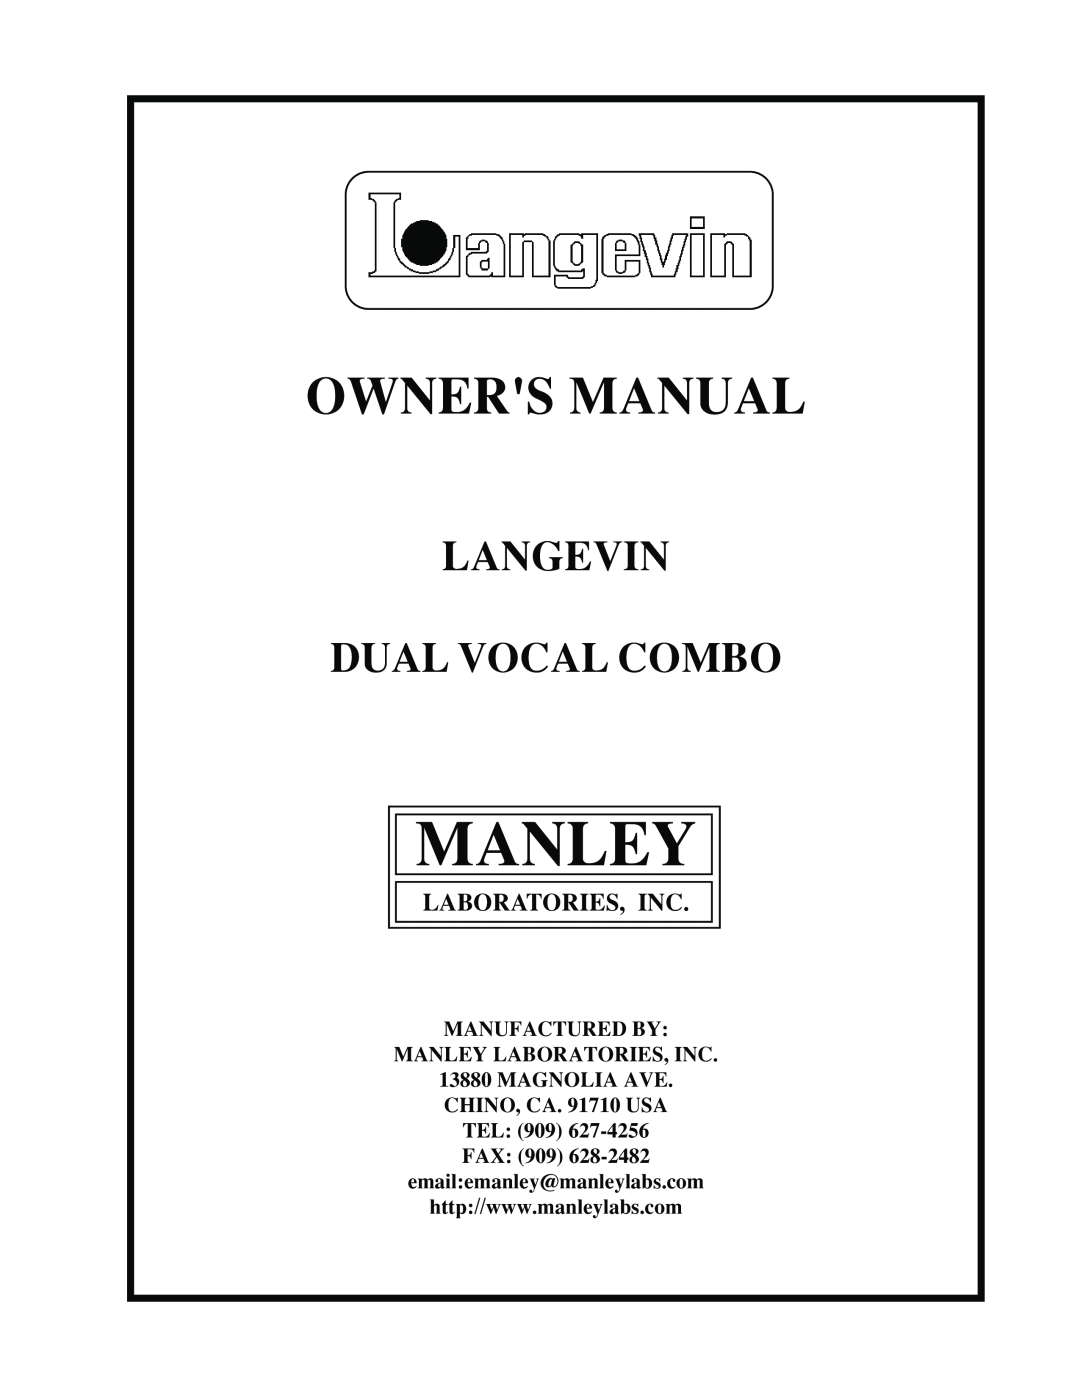 Manley Labs Langevin Dual Vocal Combo owner manual Manufactured By Manley Laboratories, Inc 